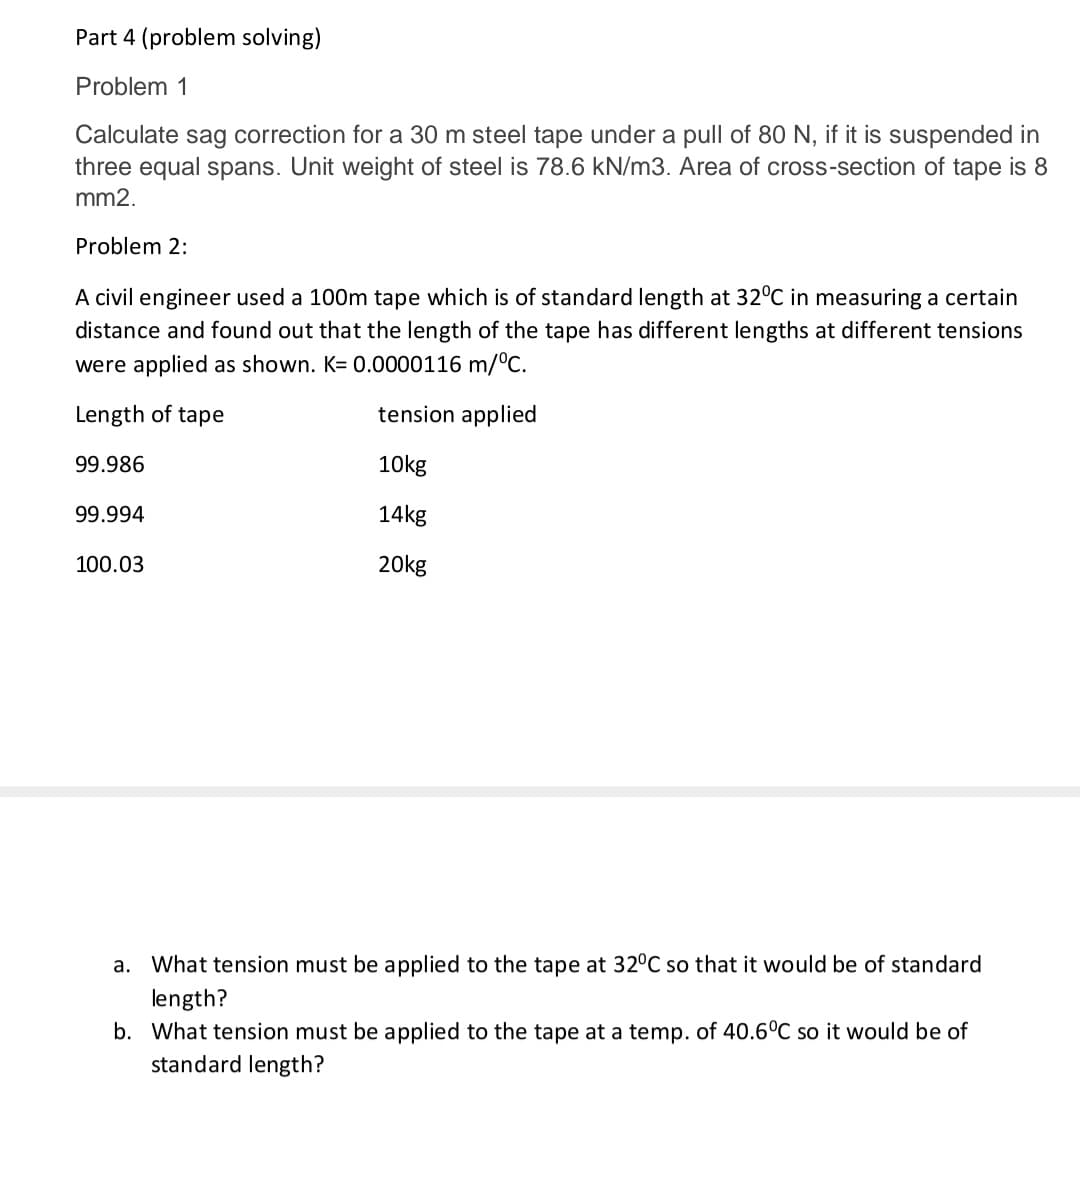 Part 4 (problem solving)
Problem 1
Calculate sag correction for a 30 m steel tape under a pull of 80 N, if it is suspended in
three equal spans. Unit weight of steel is 78.6 kN/m3. Area of cross-section of tape is 8
mm2.
Problem 2:
A civil engineer used a 100m tape which is of standard length at 32°C in measuring a certain
distance and found out that the length of the tape has different lengths at different tensions
were applied as shown. K= 0.0000116 m/°c.
Length of tape
tension applied
99.986
10kg
99.994
14kg
100.03
20kg
a. What tension must be applied to the tape at 32°C so that it would be of standard
length?
b. What tension must be applied to the tape at a temp. of 40.6°C so it would be of
standard length?
